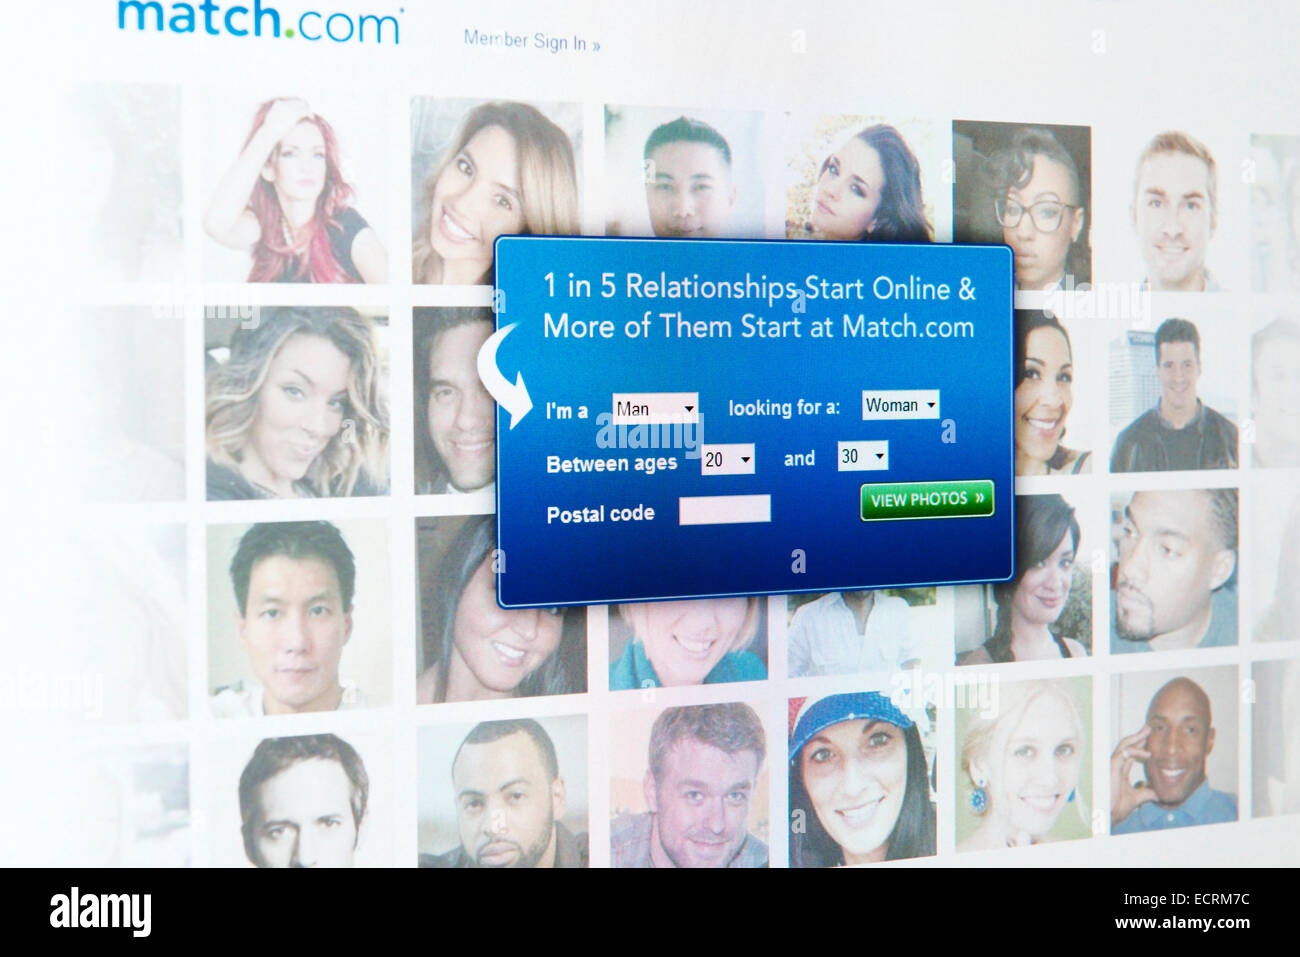 Dating website match.com registration screen on a computer display Stock Photo